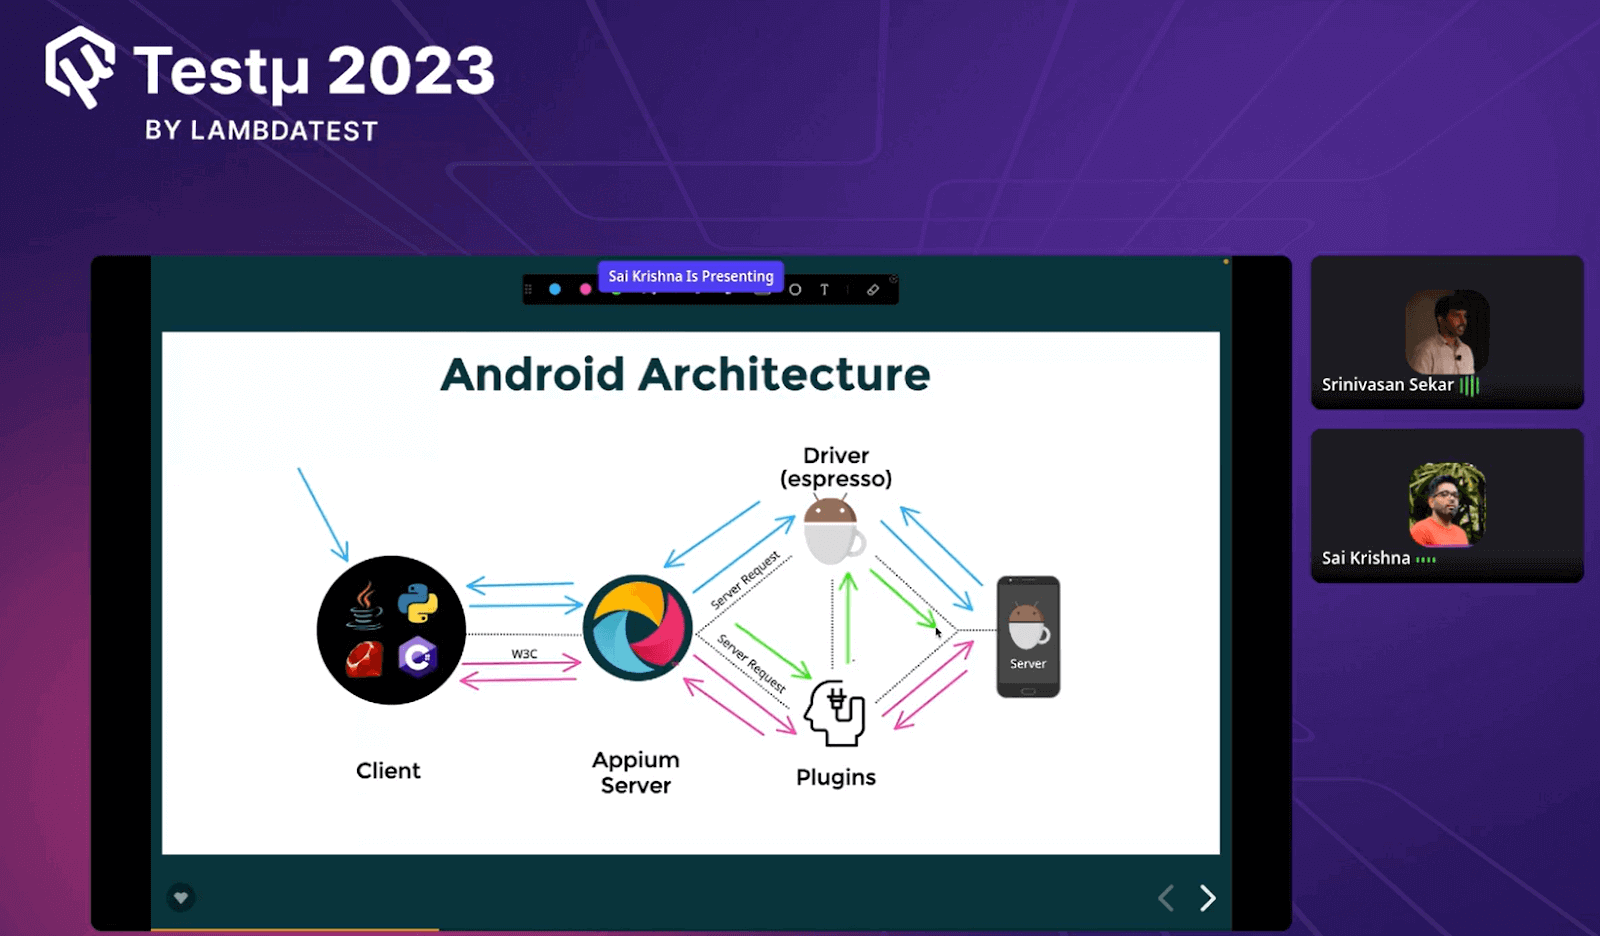 Android Architecture